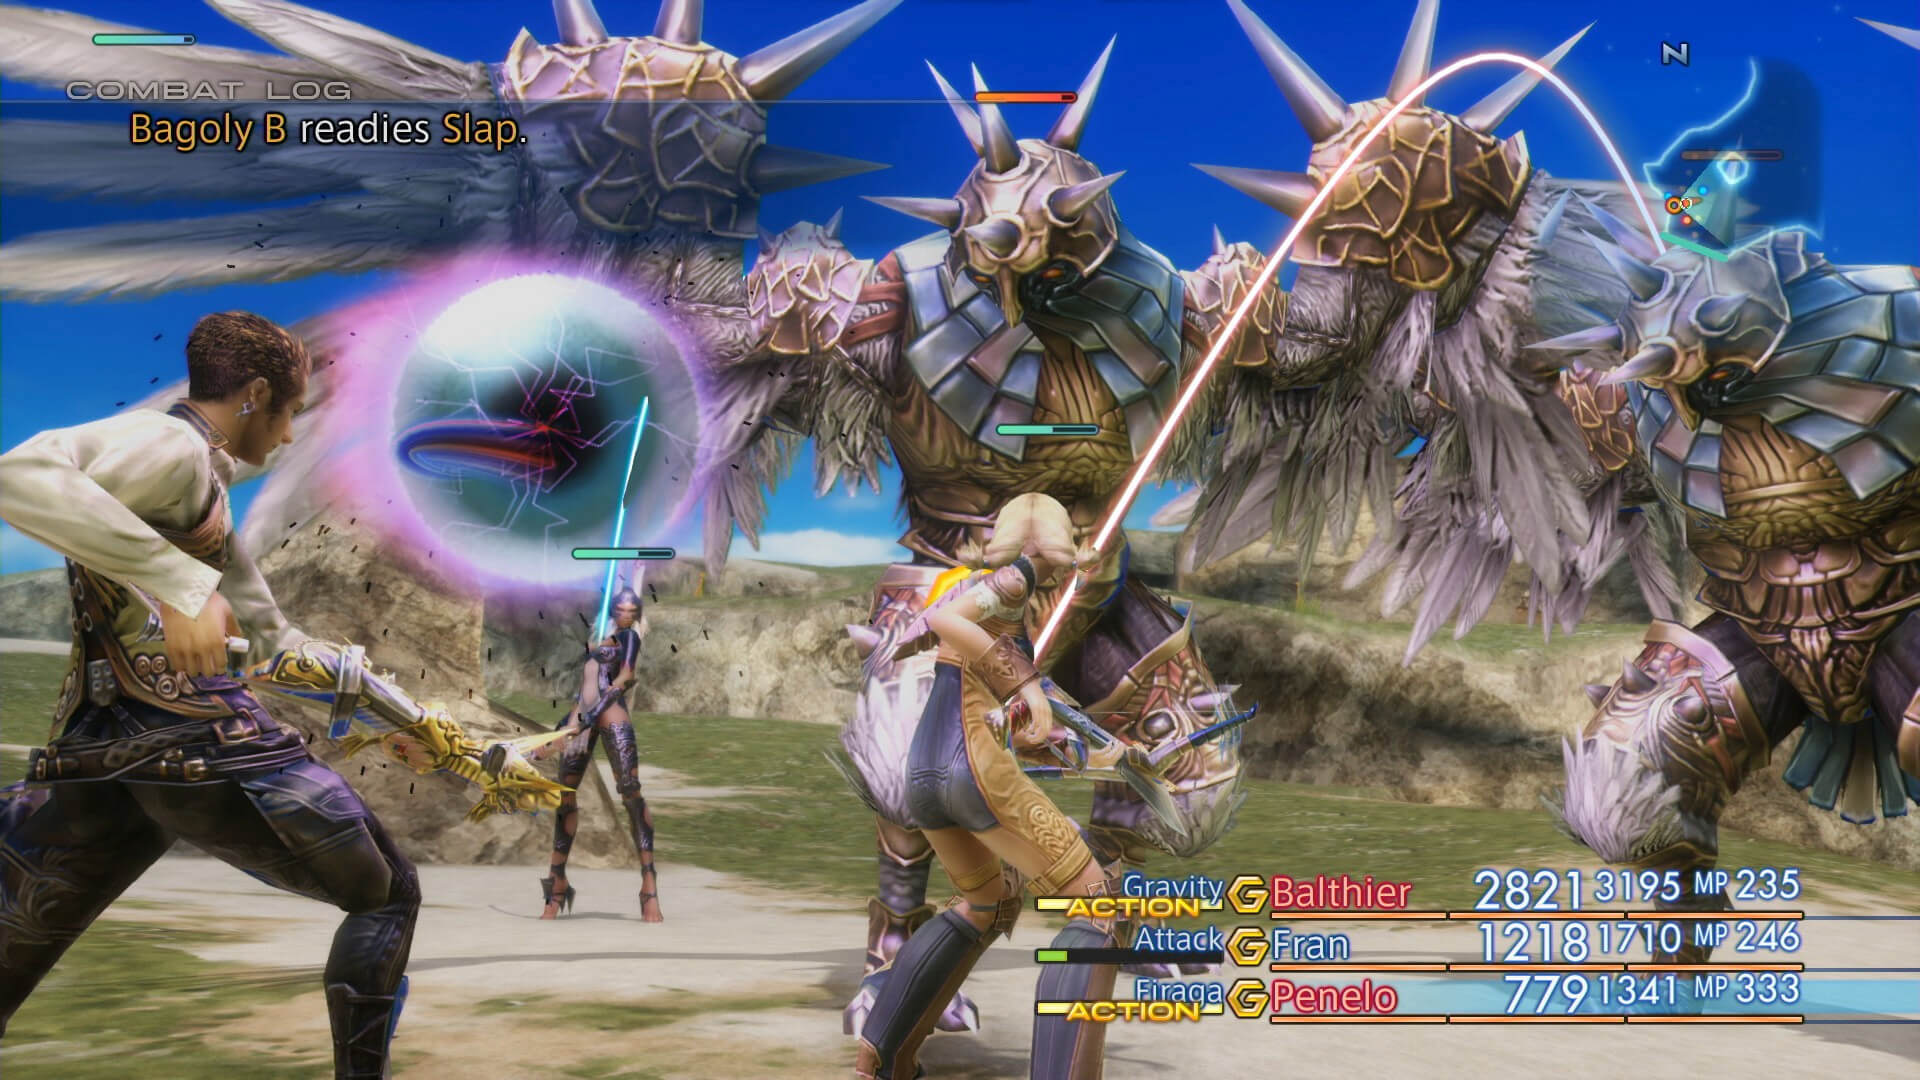 Final Fantasy 12 is where the slow shift to real-time combat began